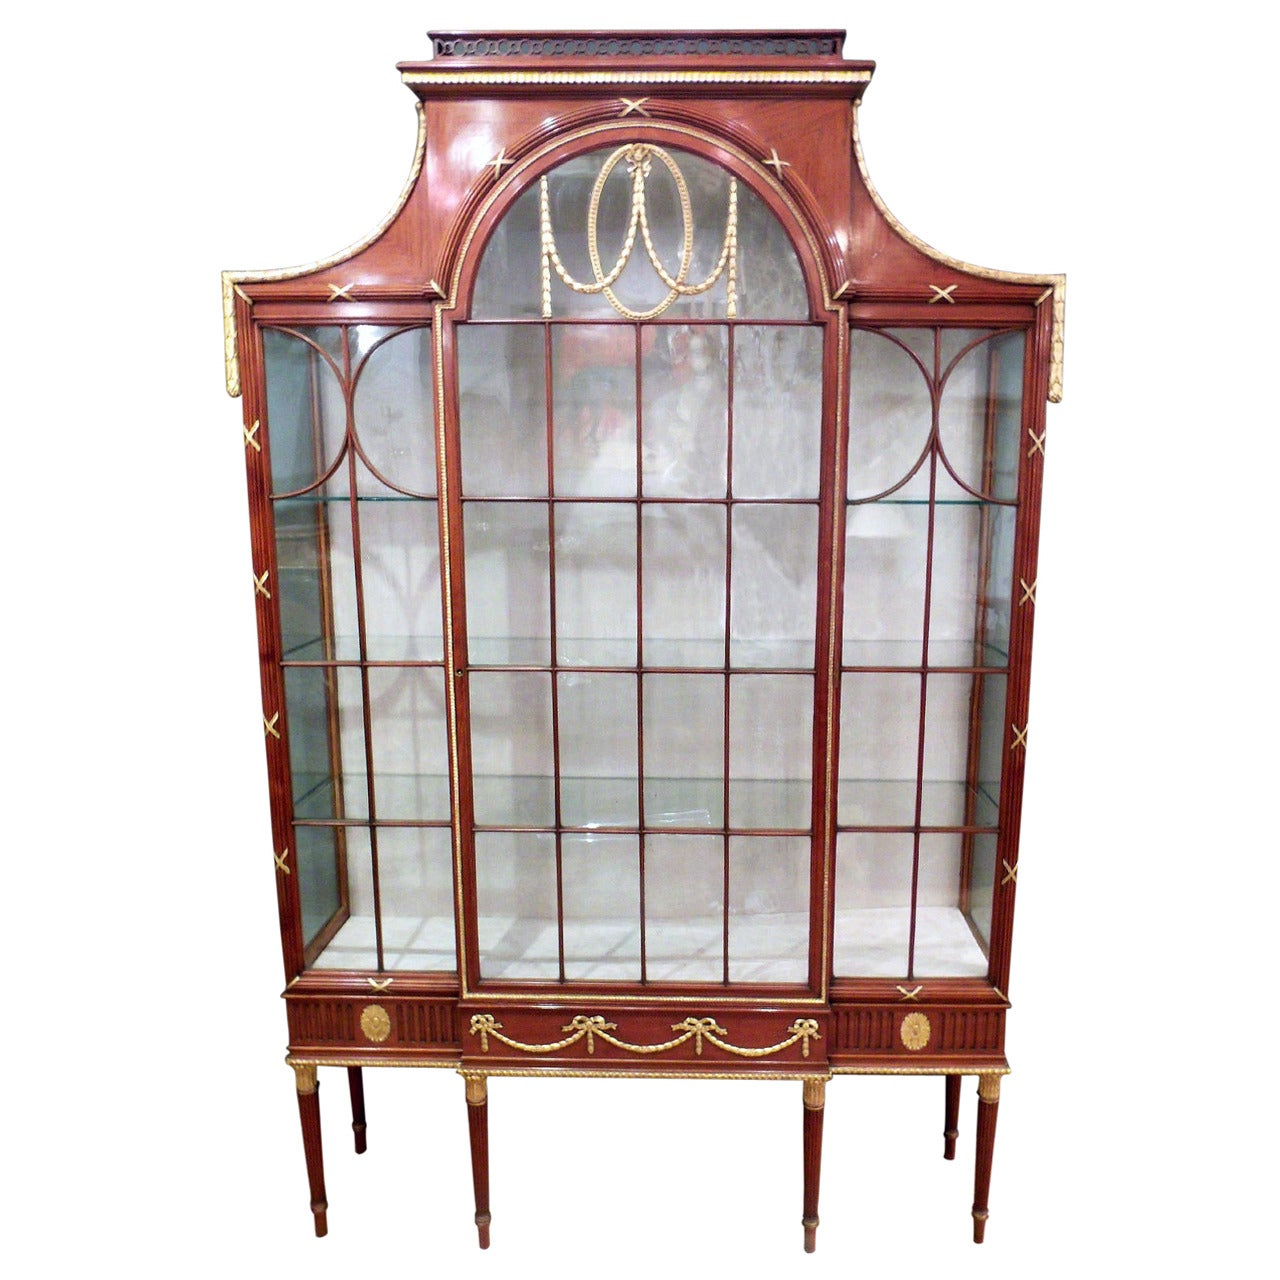 Edwardian Satinwood and Parcel-Gilt Display or China Cabinet